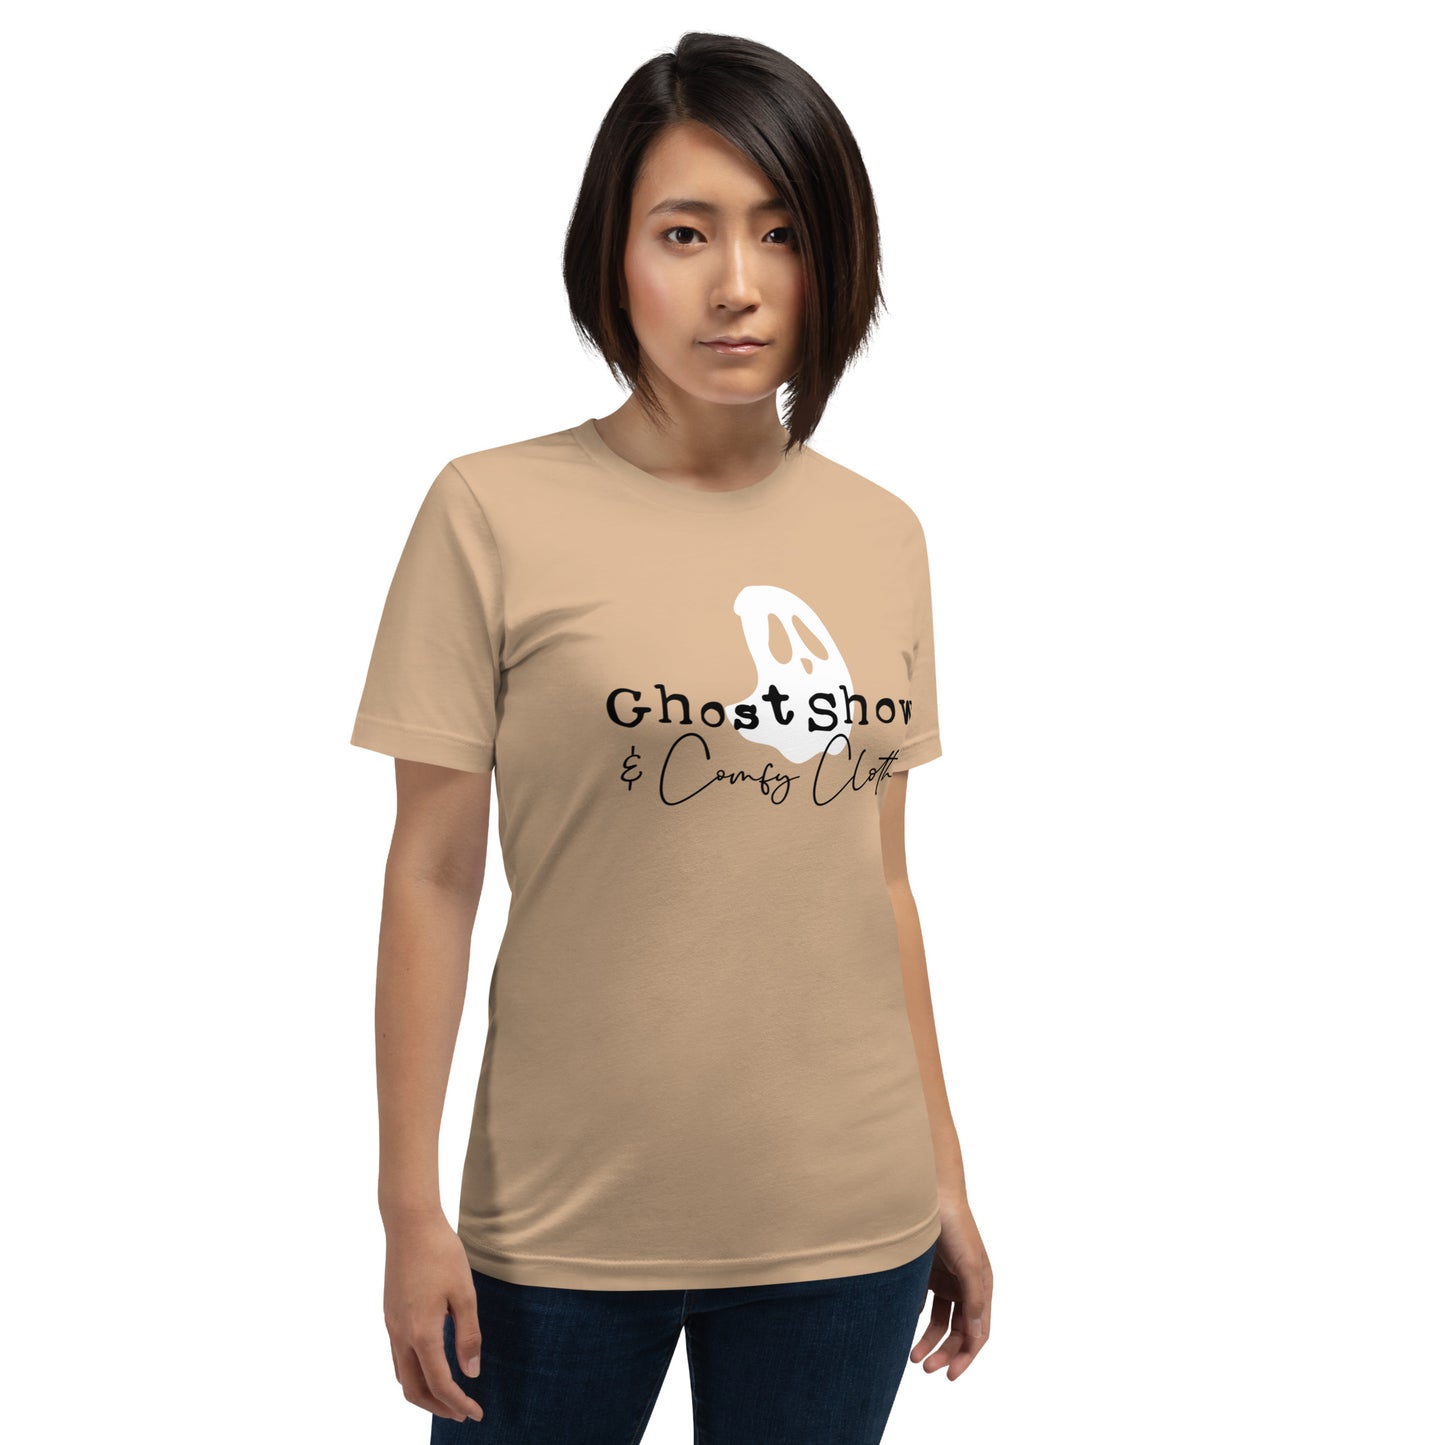 "Ghost Shows & Comfy Clothes" / Unisex t-shirt